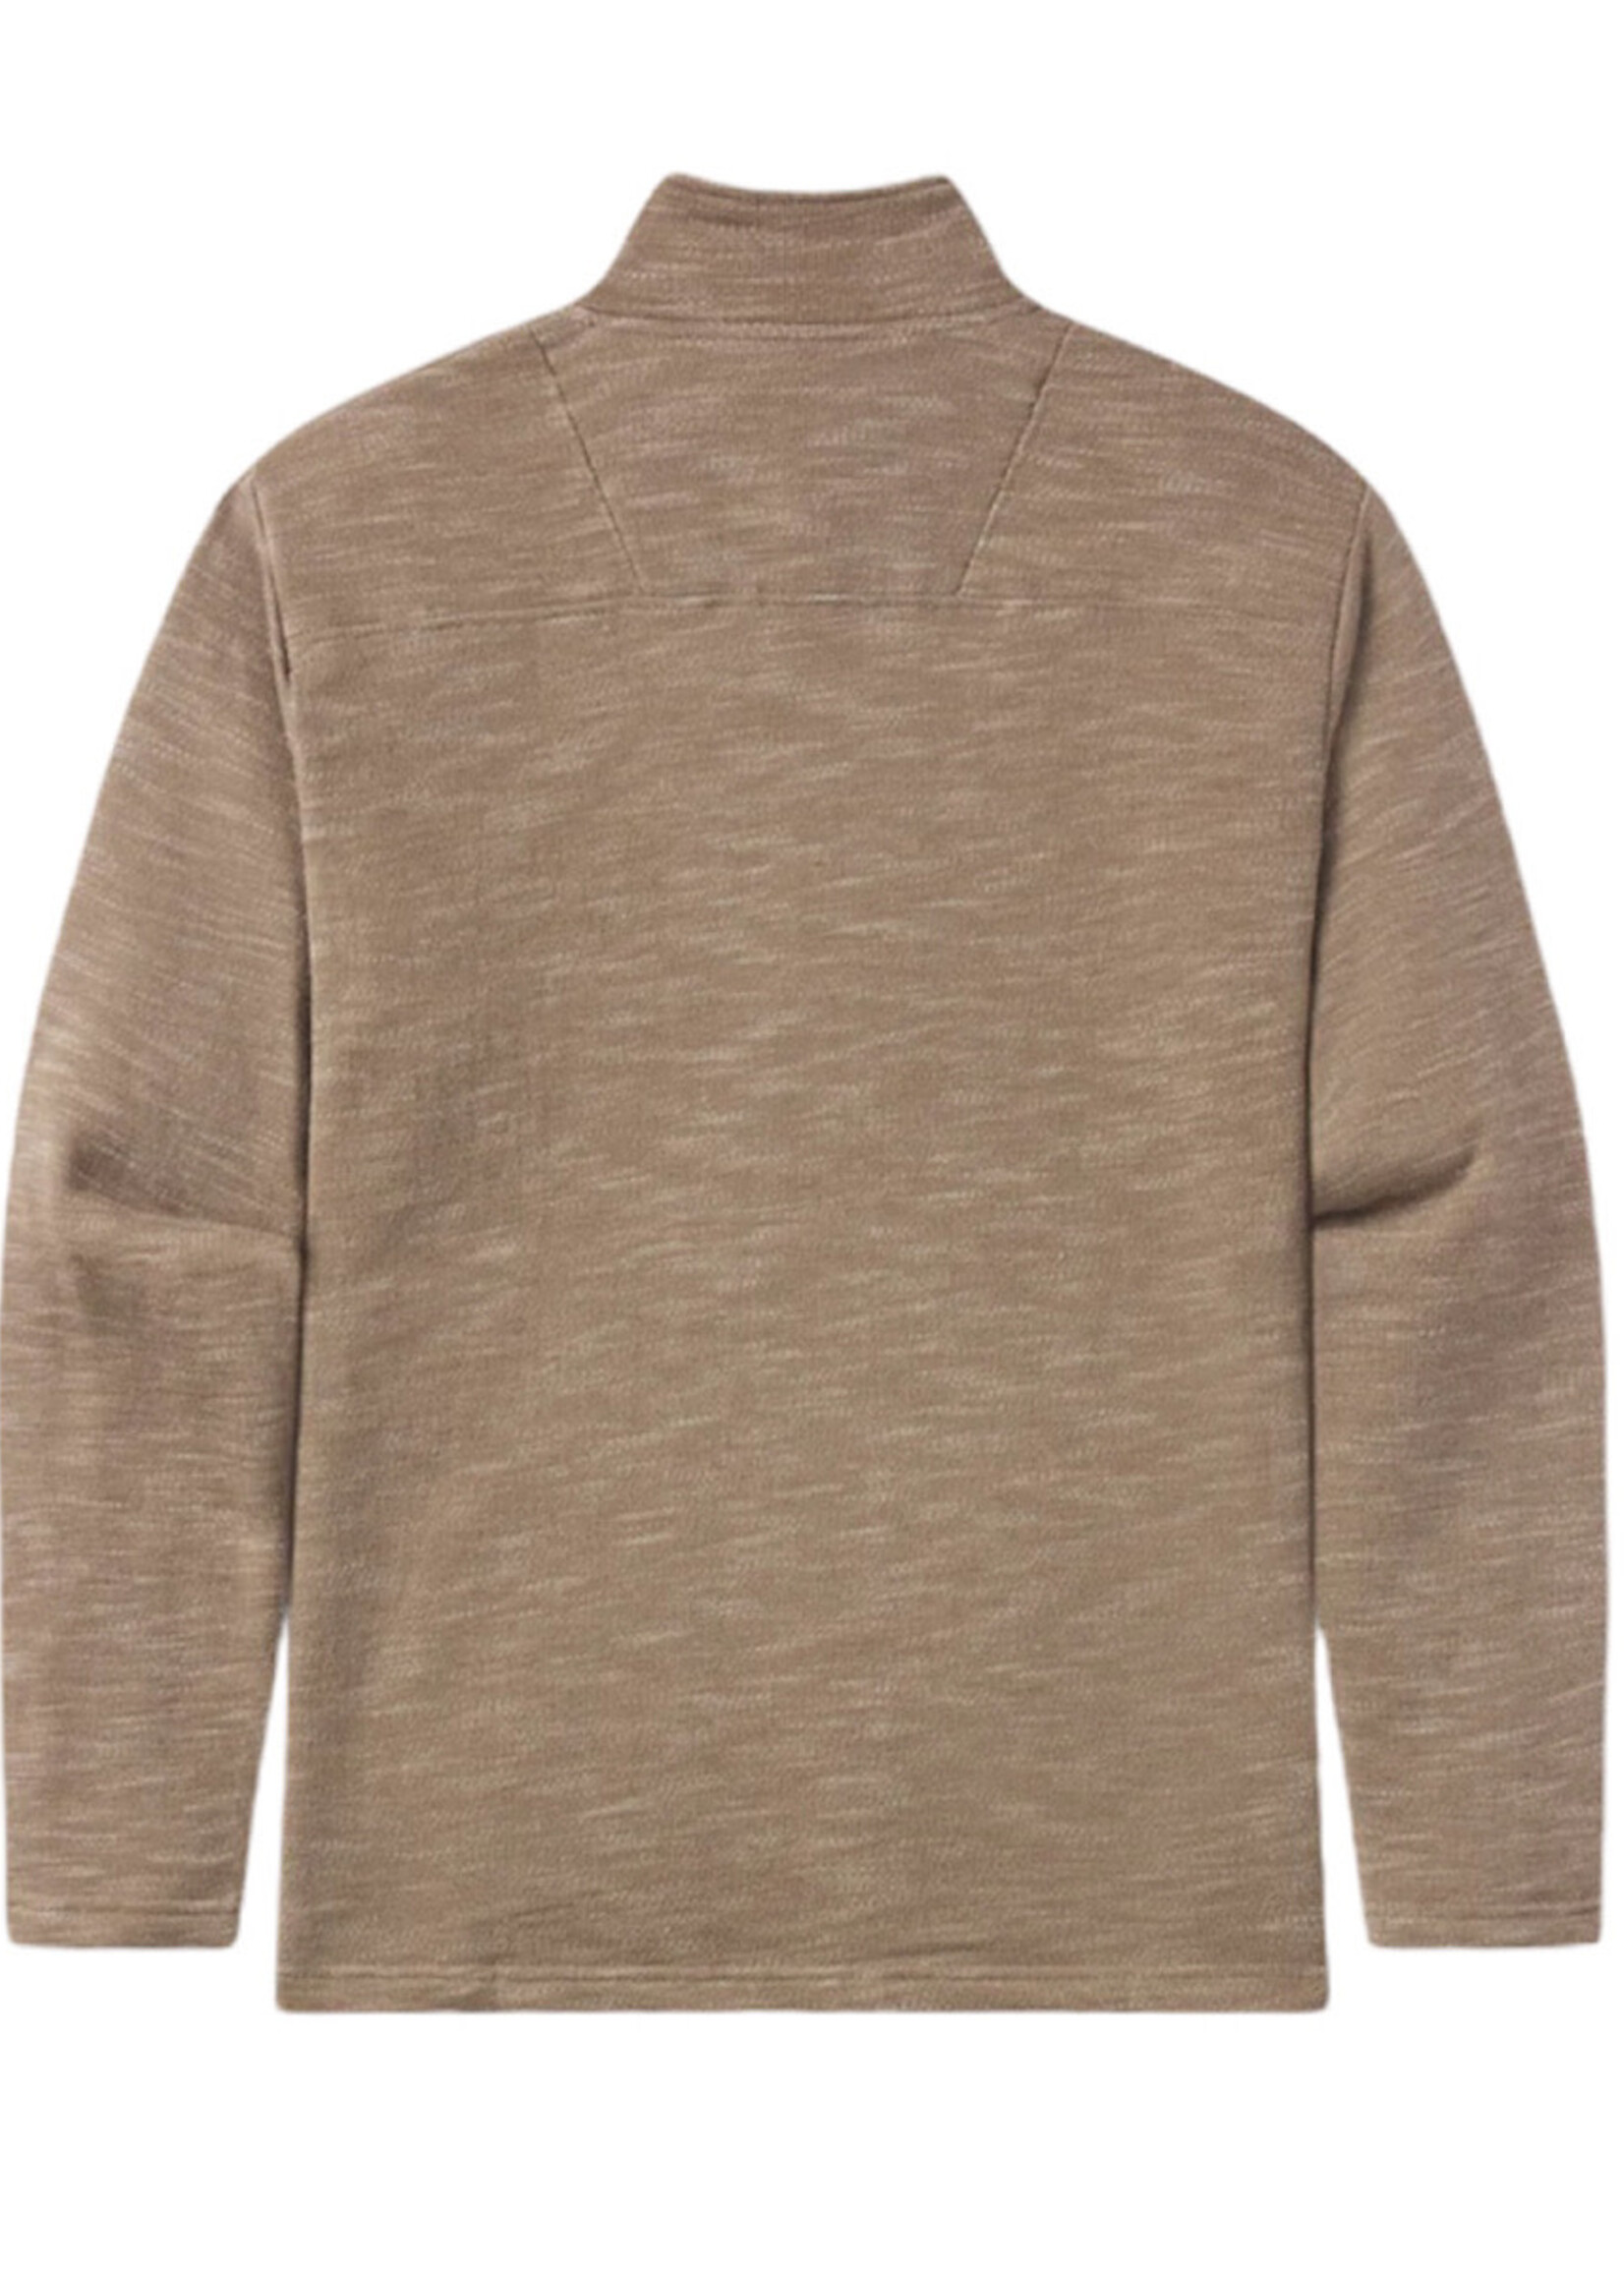 Southern Marsh Southern Marsh Midland Trail Pullover Burnt Taupe